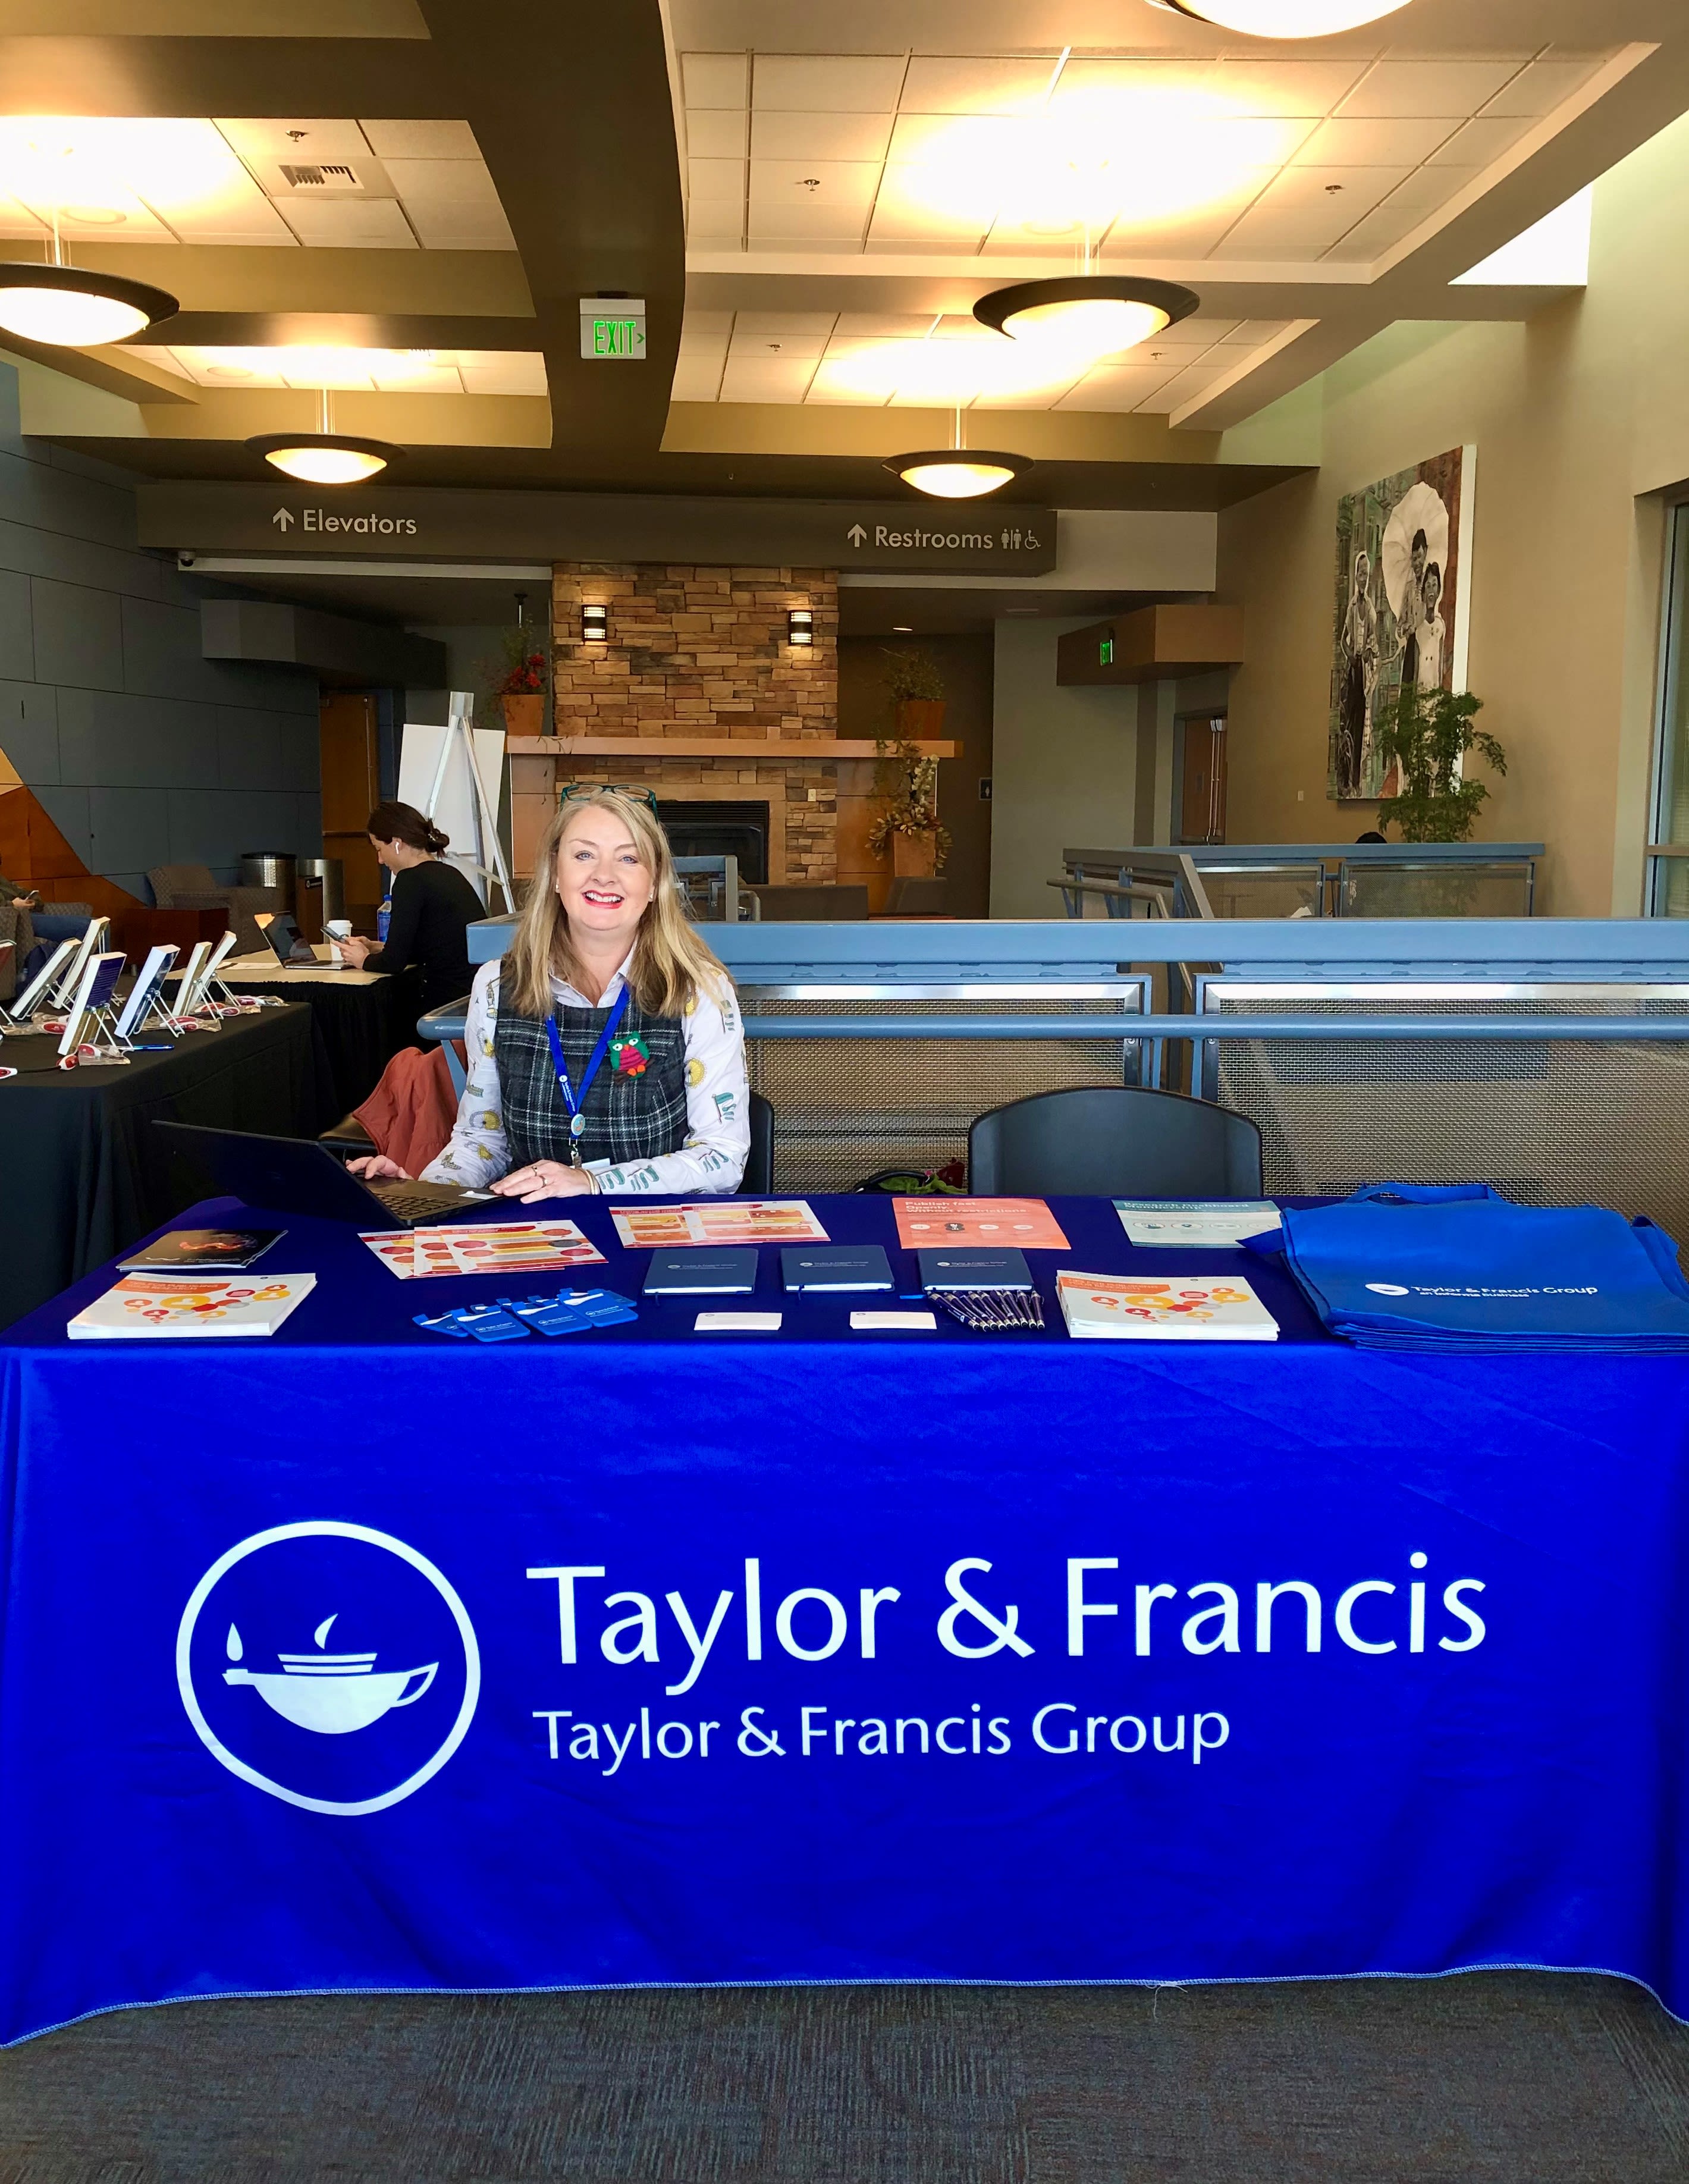 Photo of a woman sitting at a table with a Taylor & Francis banner on it.